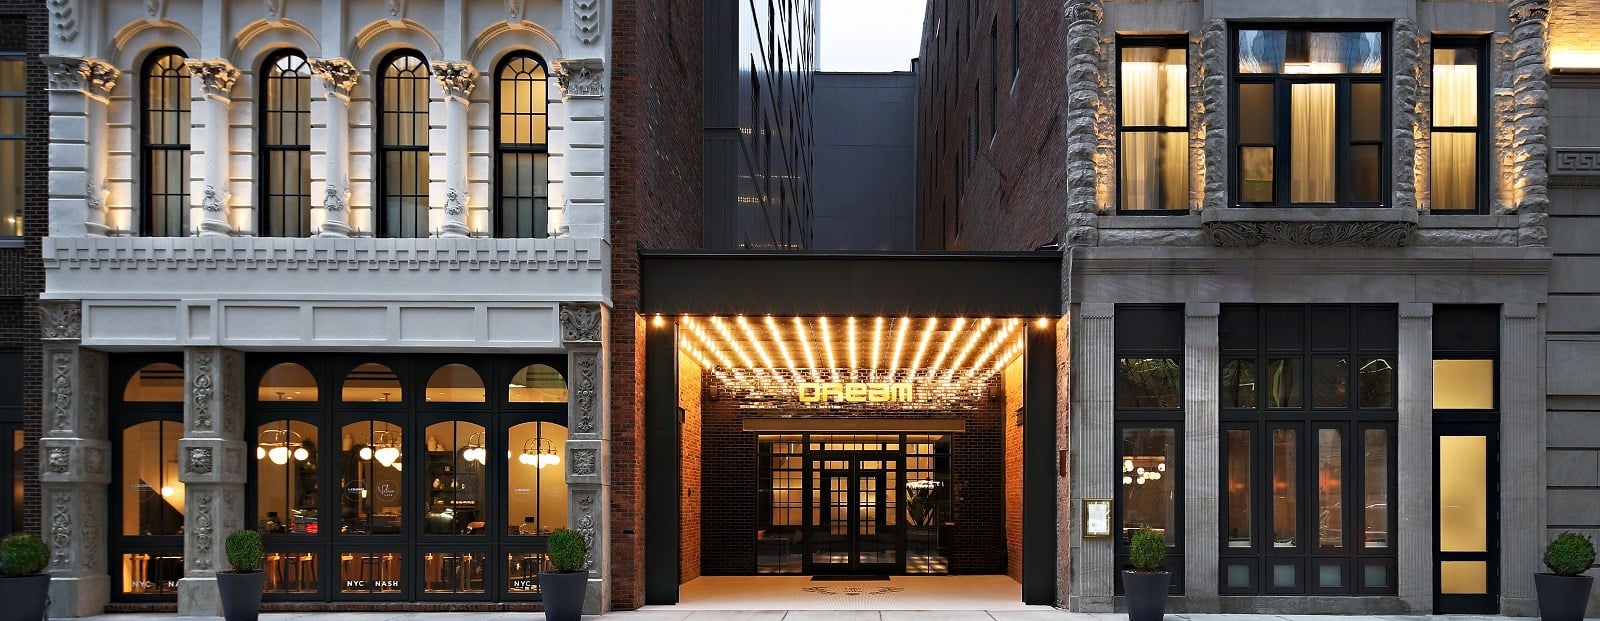 The 168-room hotel is located Music Citys historic Printers Alley and was designed by Meyer Davis Studio